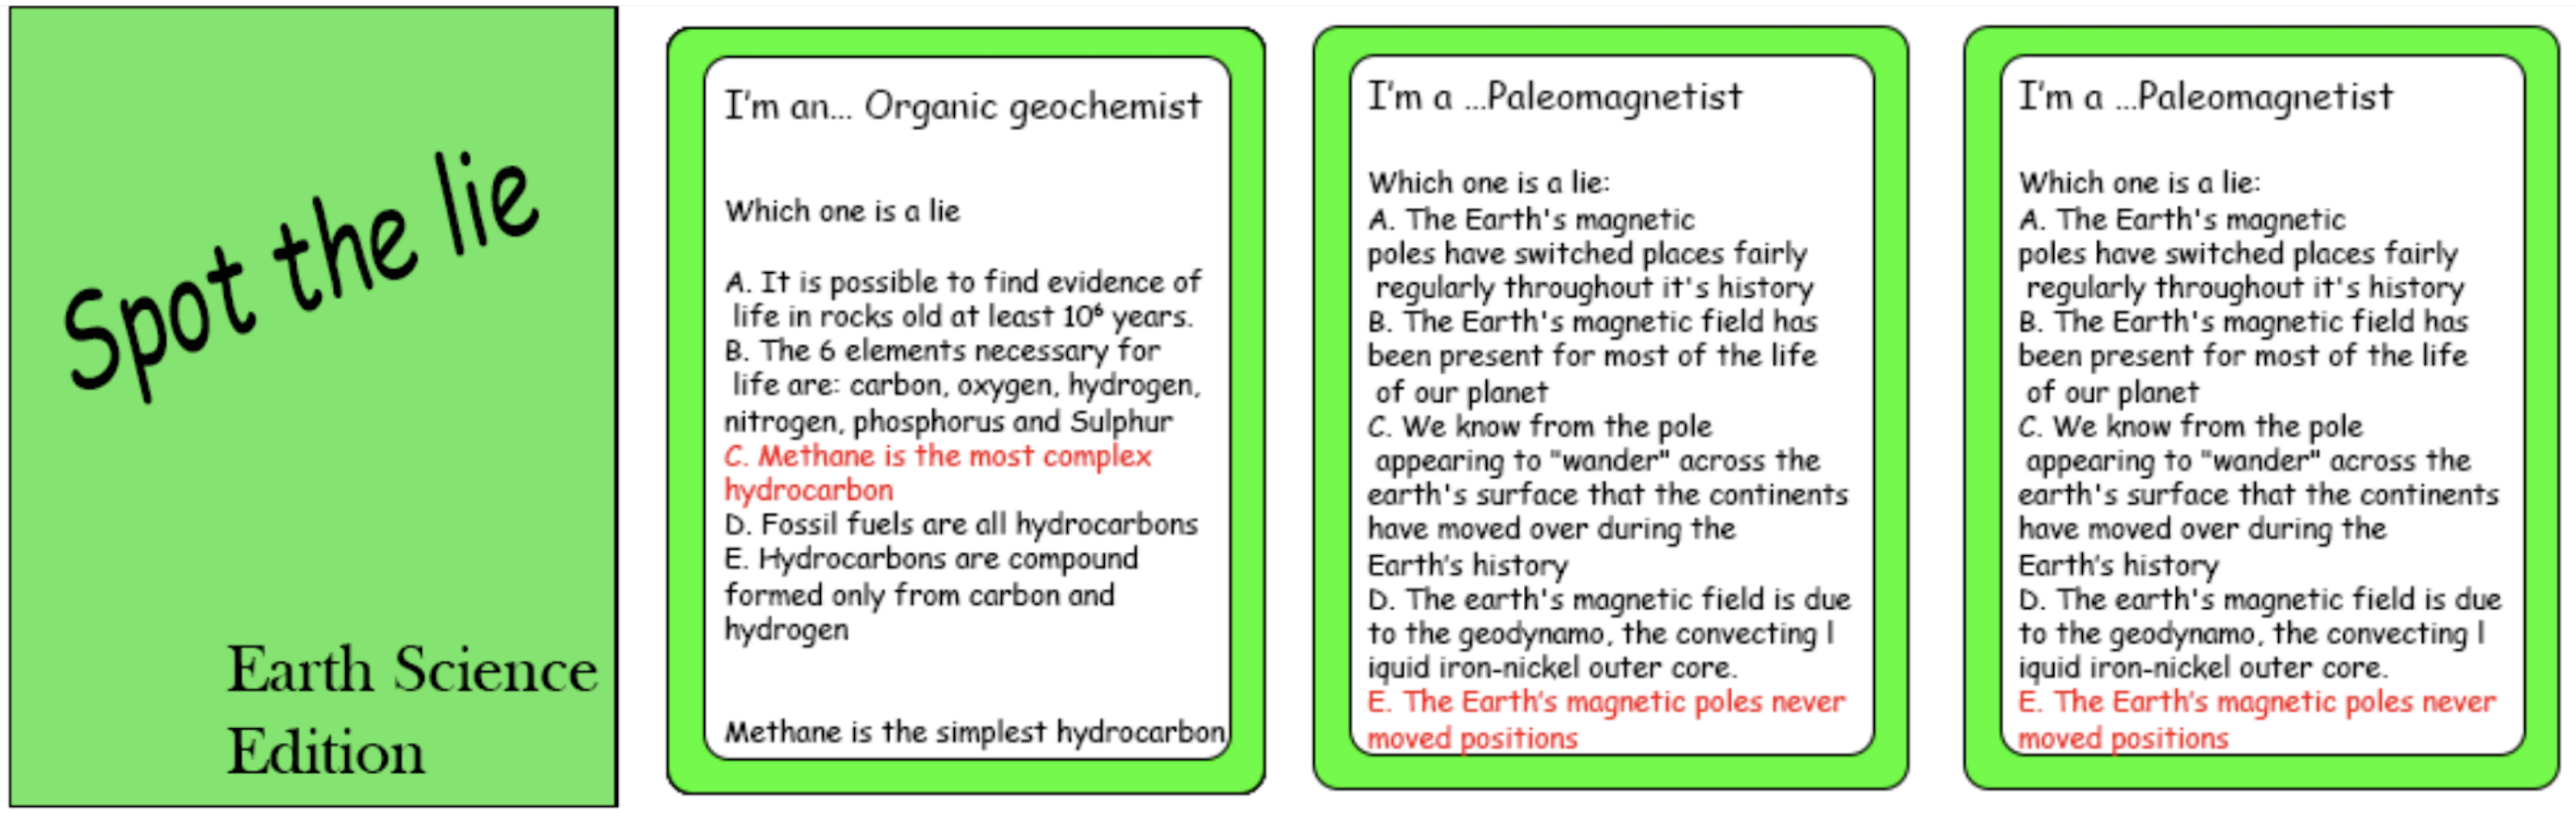 An image of the intro card for a "spot the lie" card game along with three playing cards. On each card is a scientific occupation, with a series of facts, one of which is a lie.